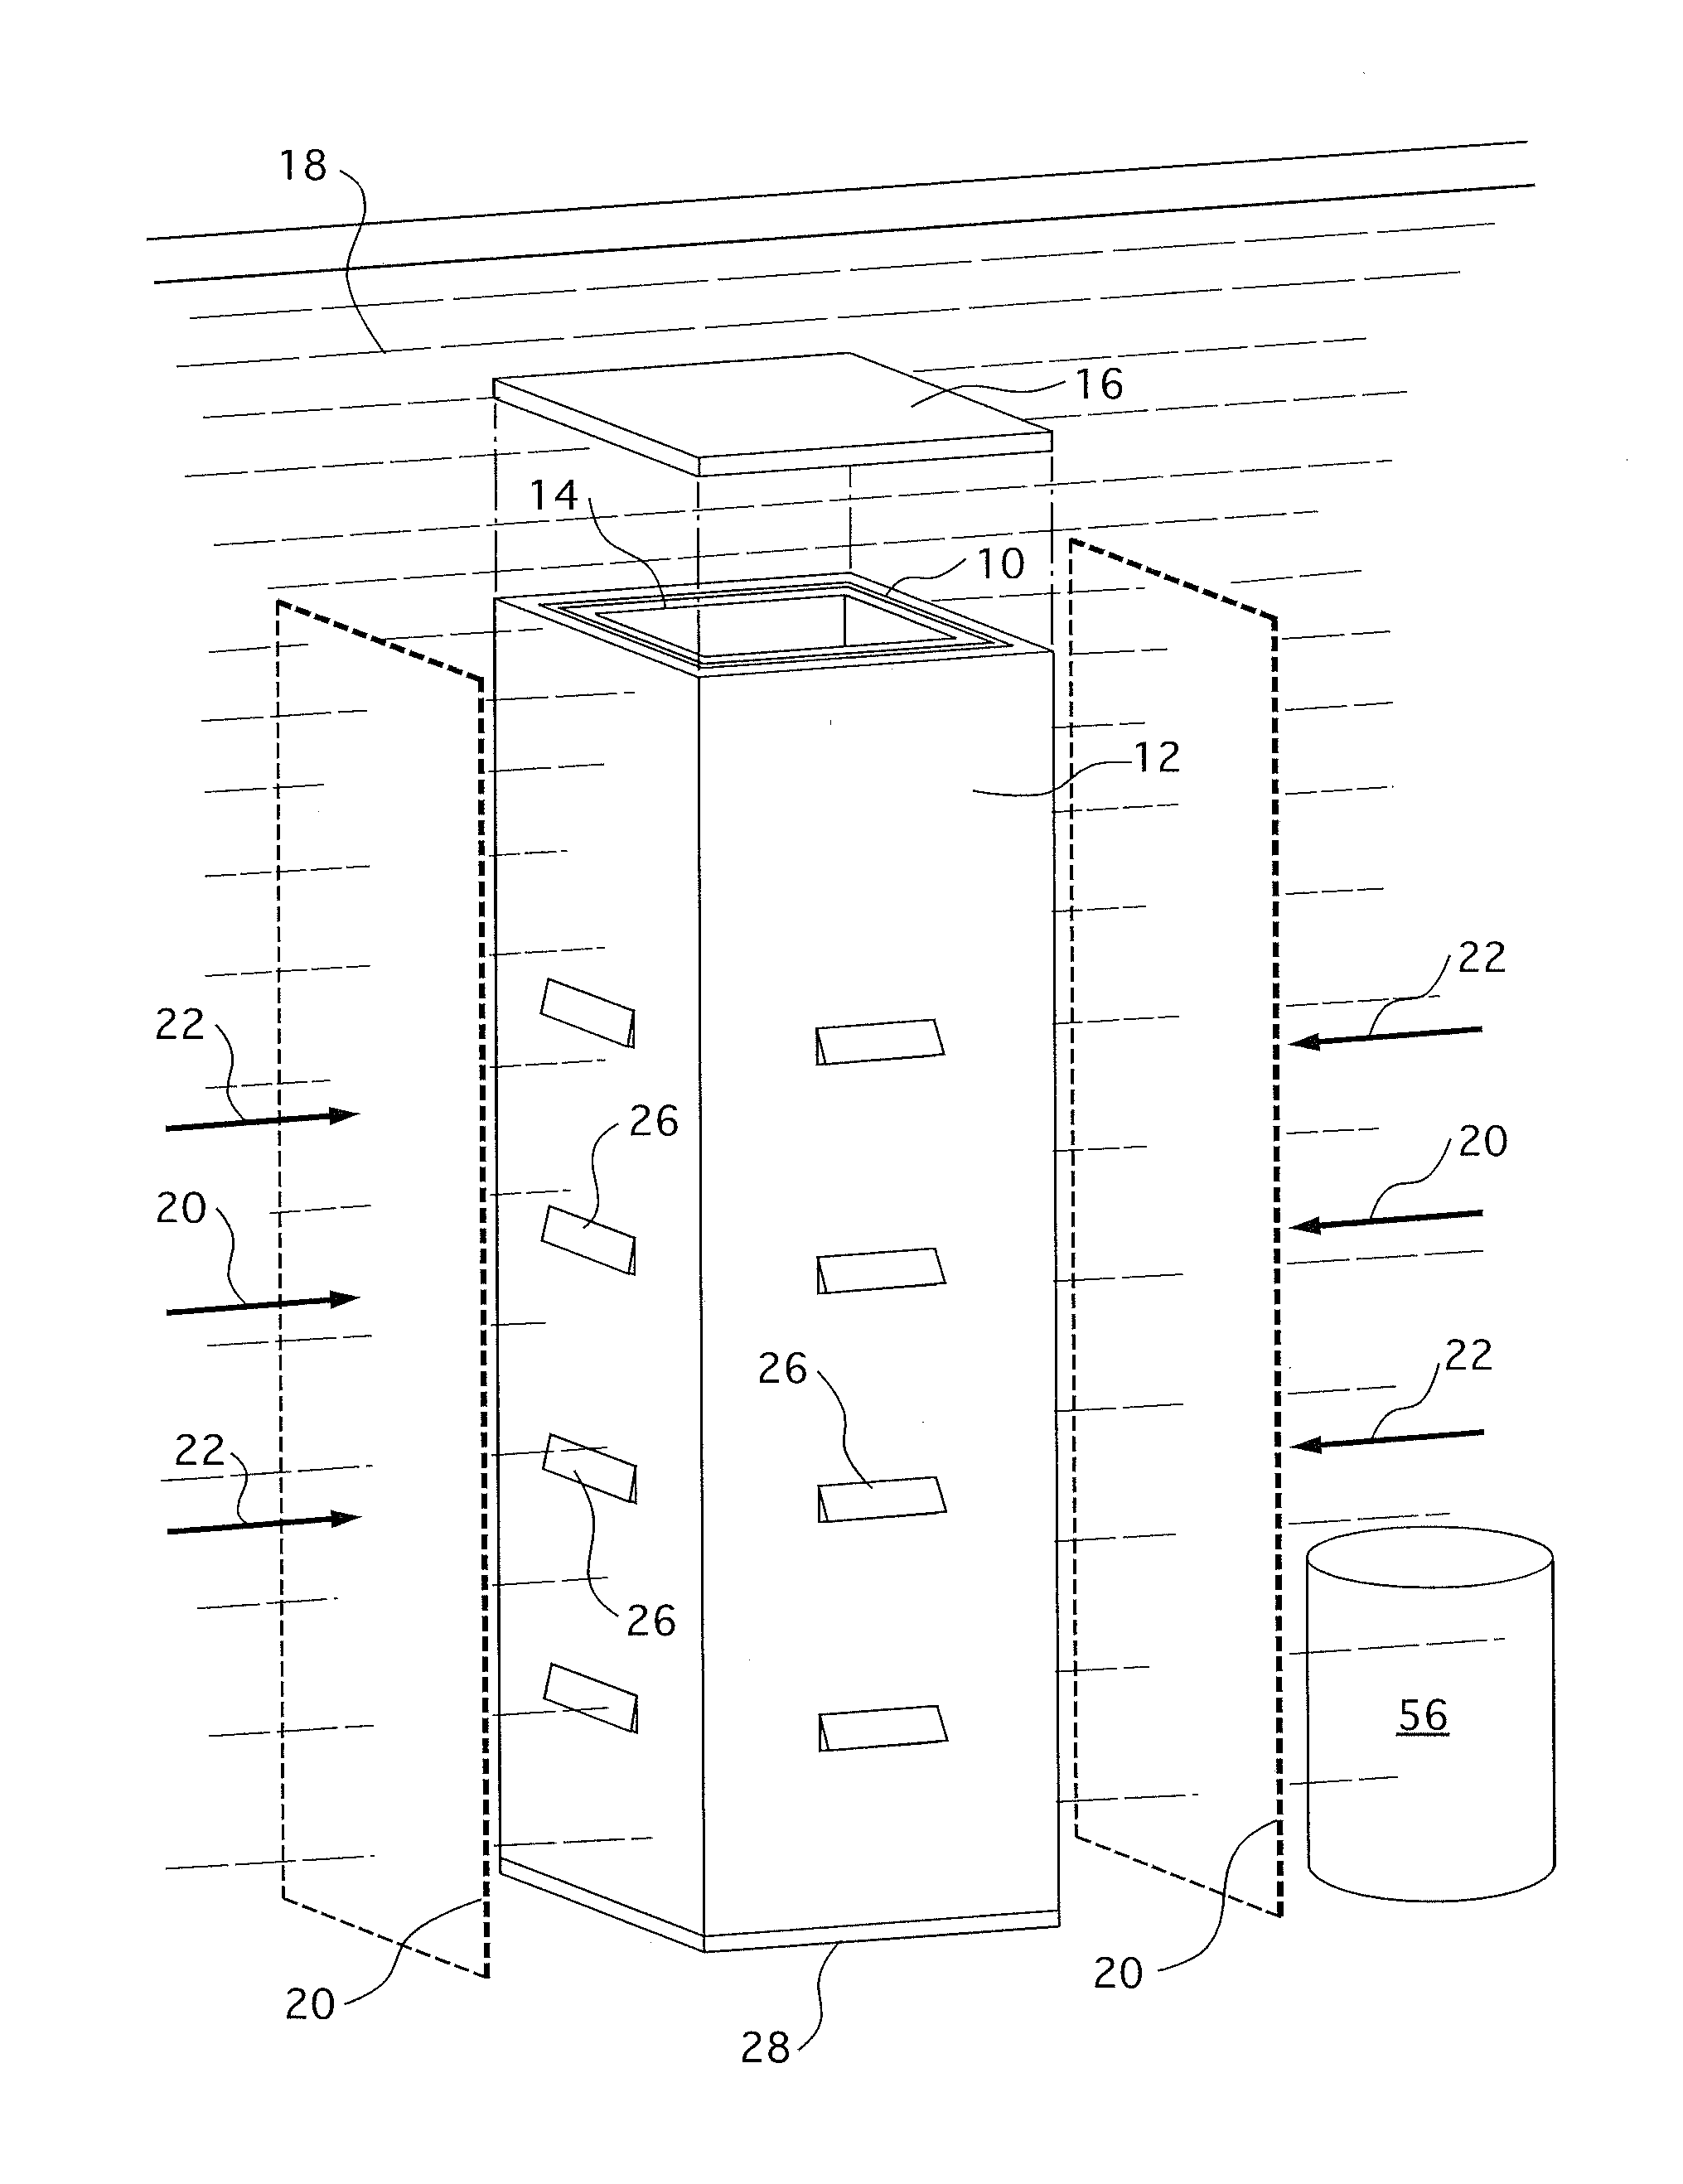 Method of segmenting and packaging irradiated components